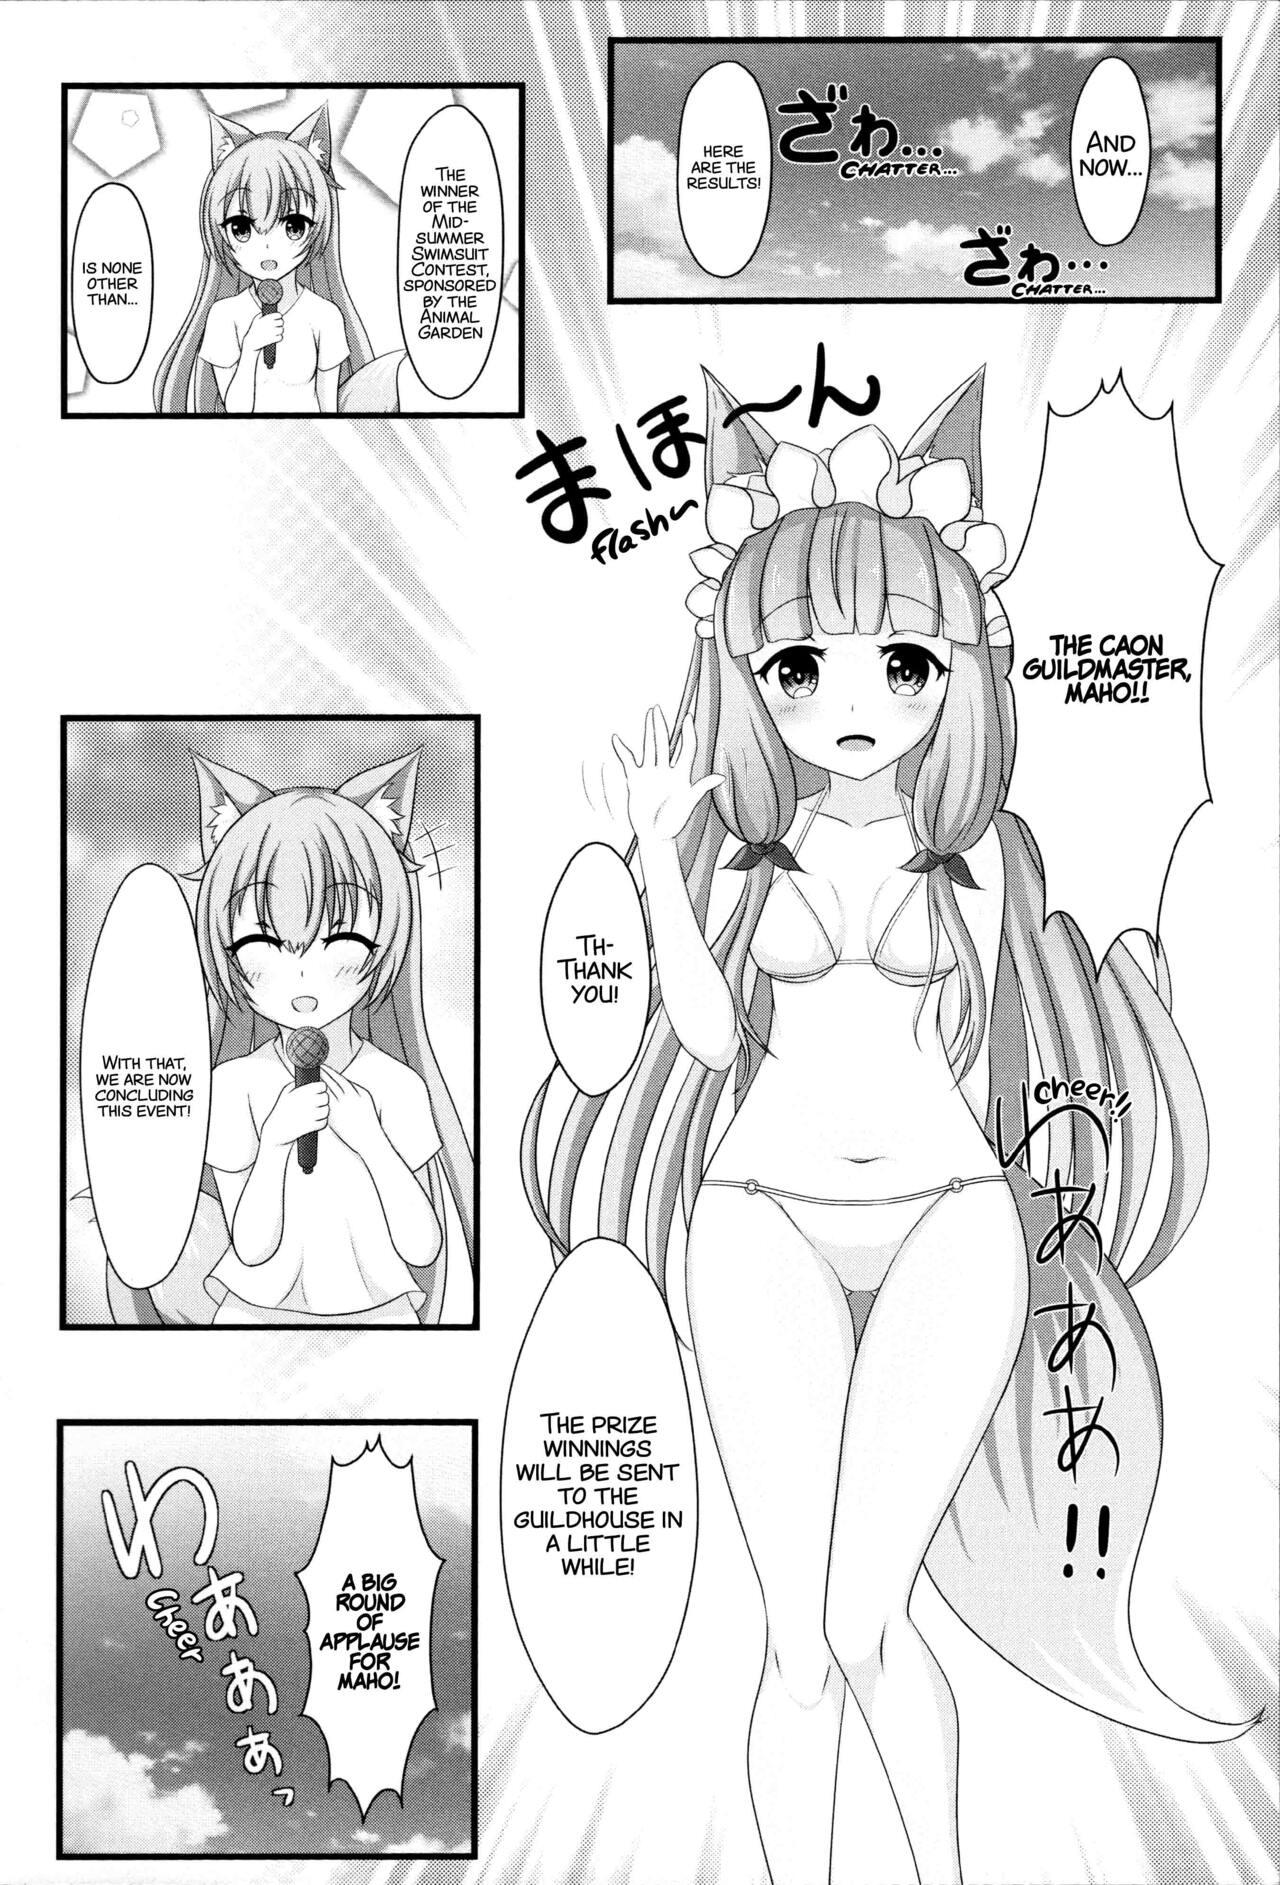 Face Sitting Maho Hime Connect! 2 - Princess connect Cruising - Page 5